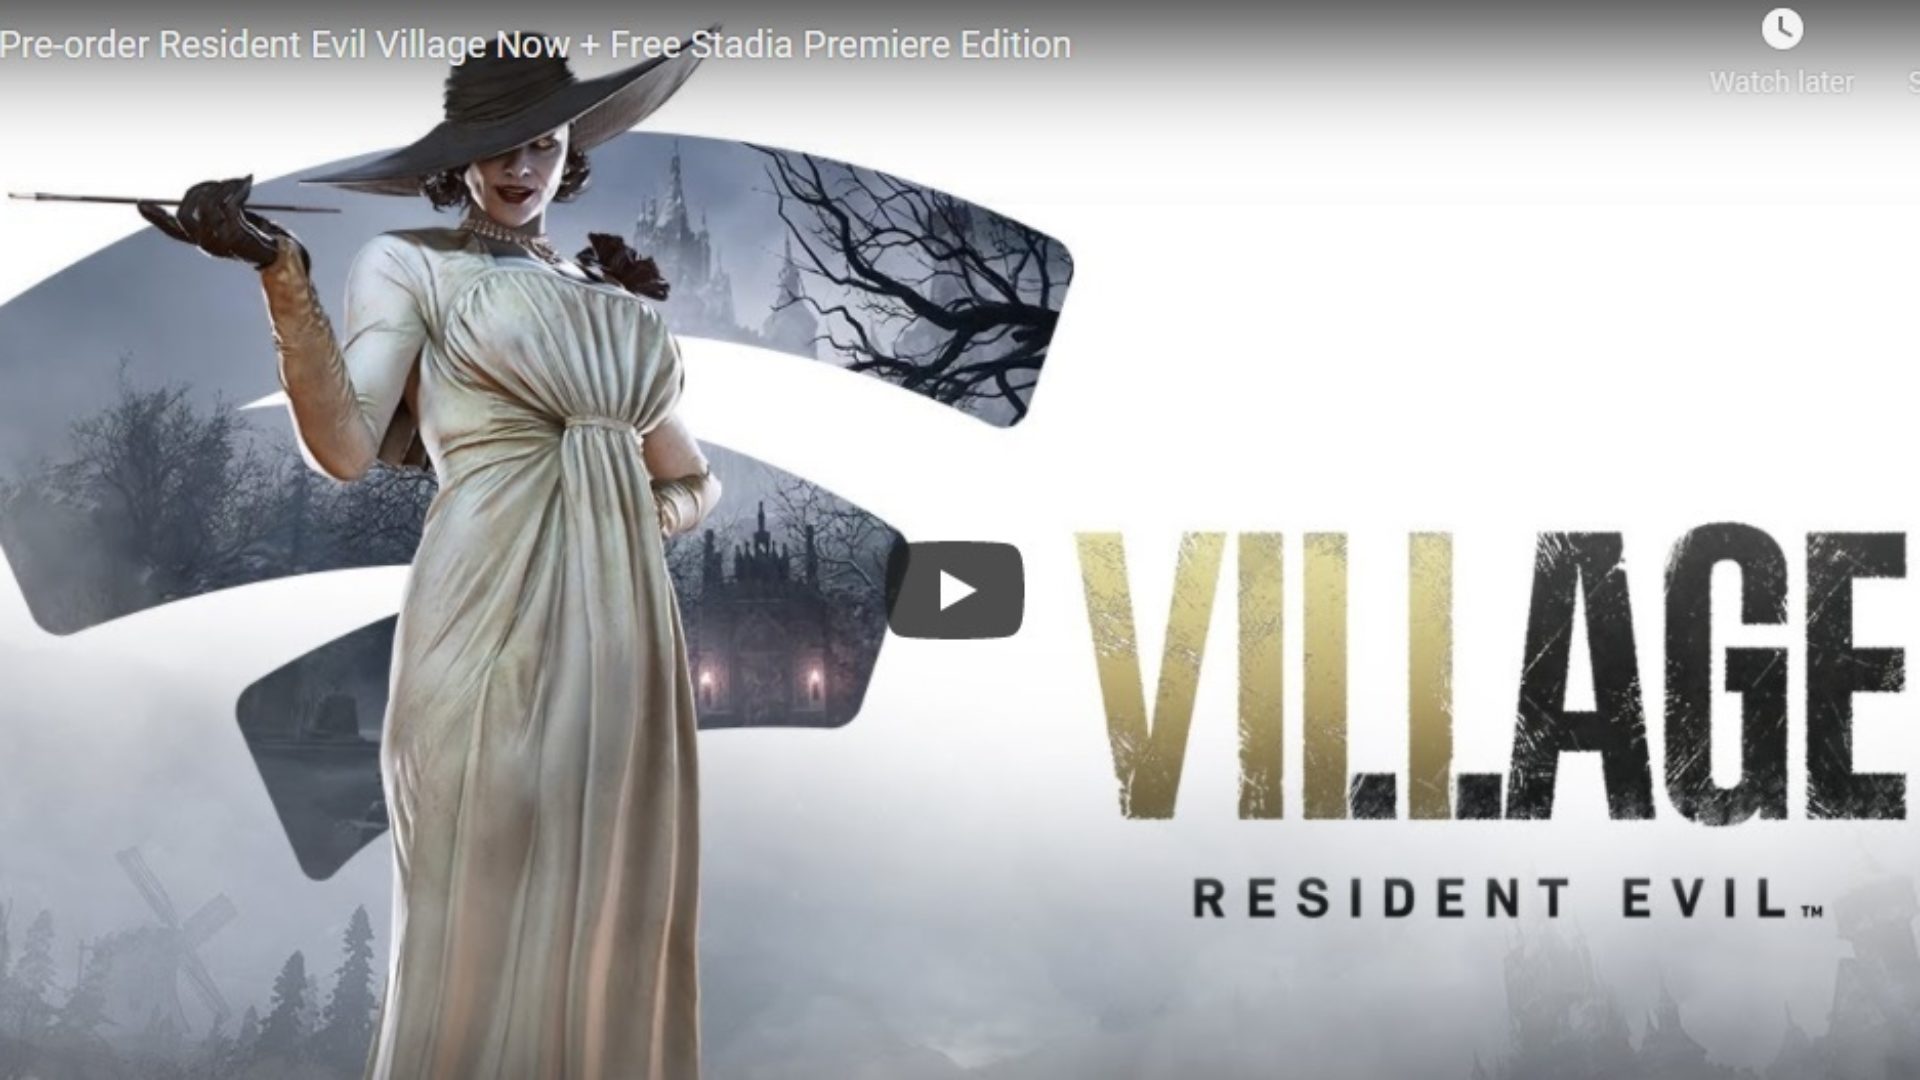 Resident Evil Village will be available in Stadia

